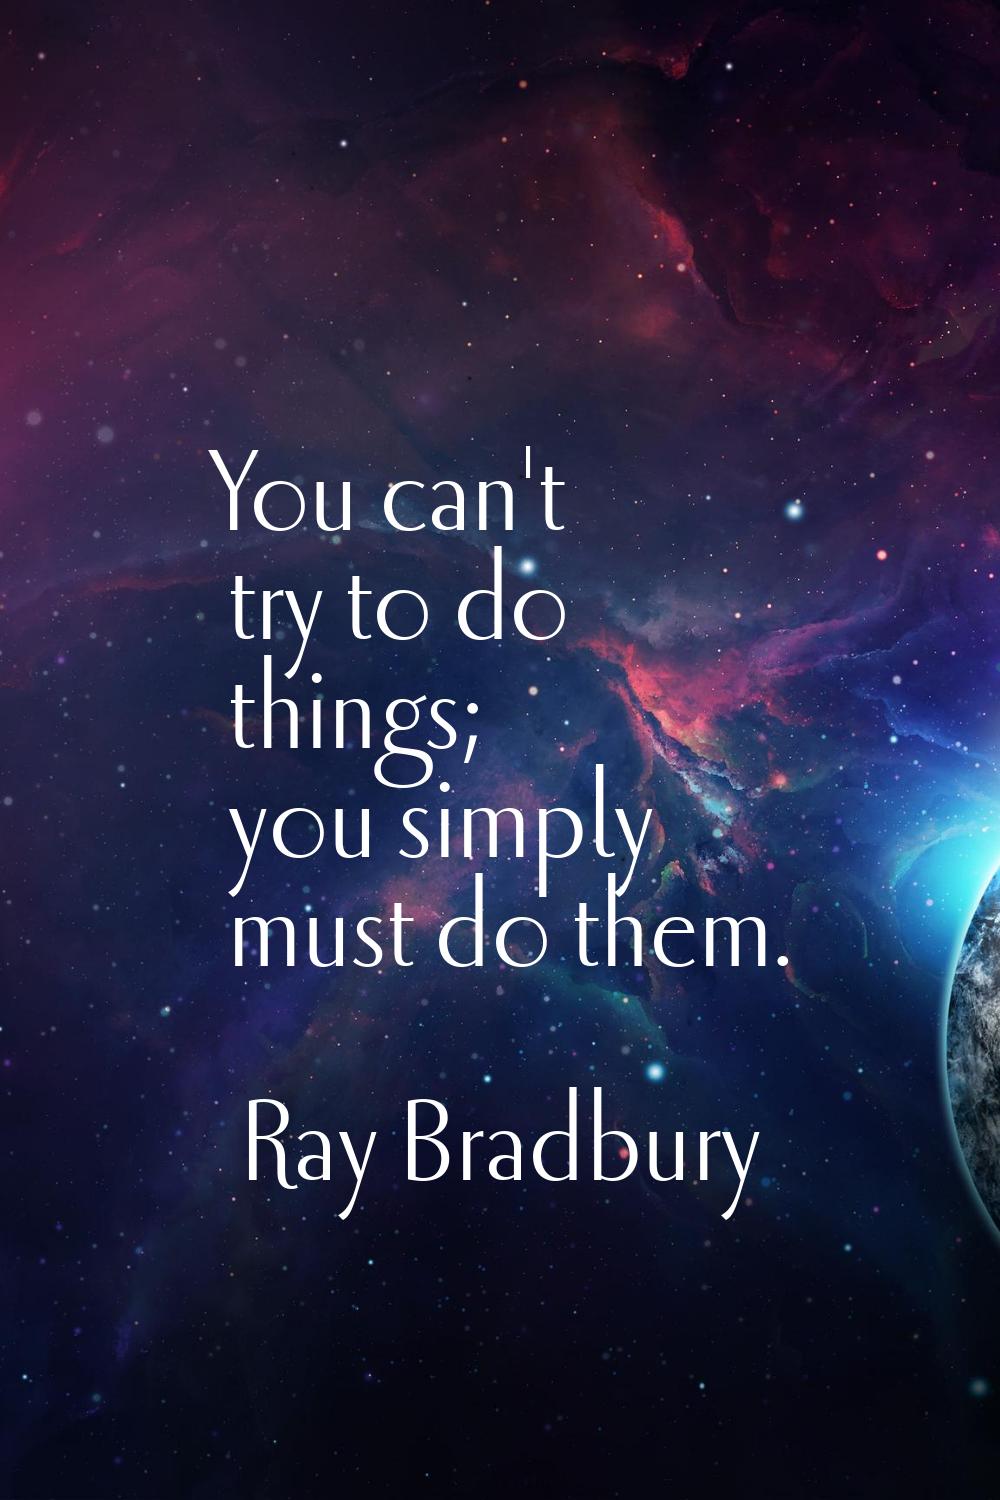 You can't try to do things; you simply must do them.